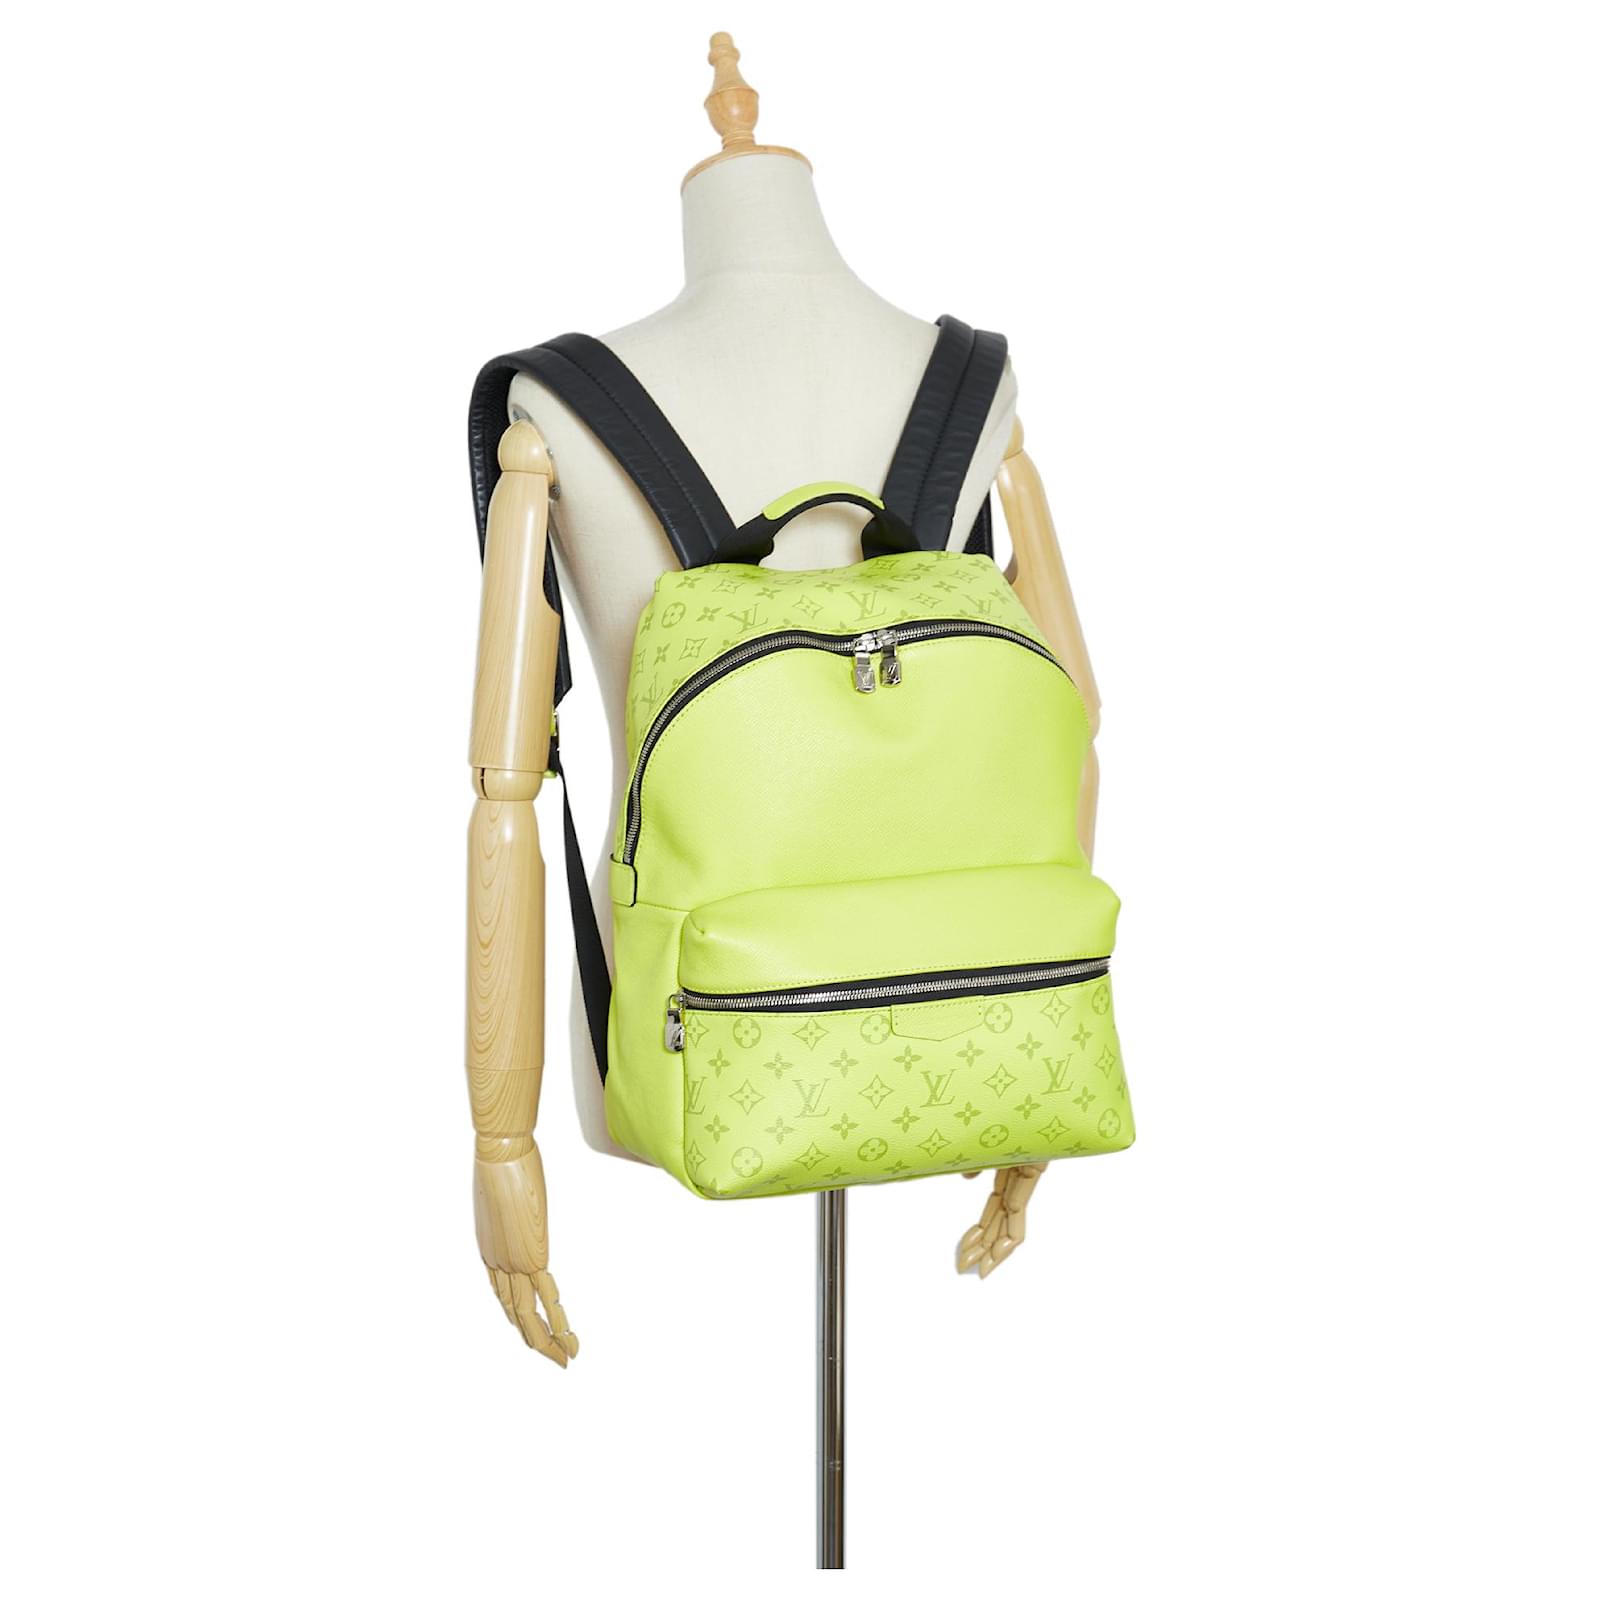 Louis+Vuitton+Discovery+Backpack+PM+Green+Lime+Monogram+Taigarama+